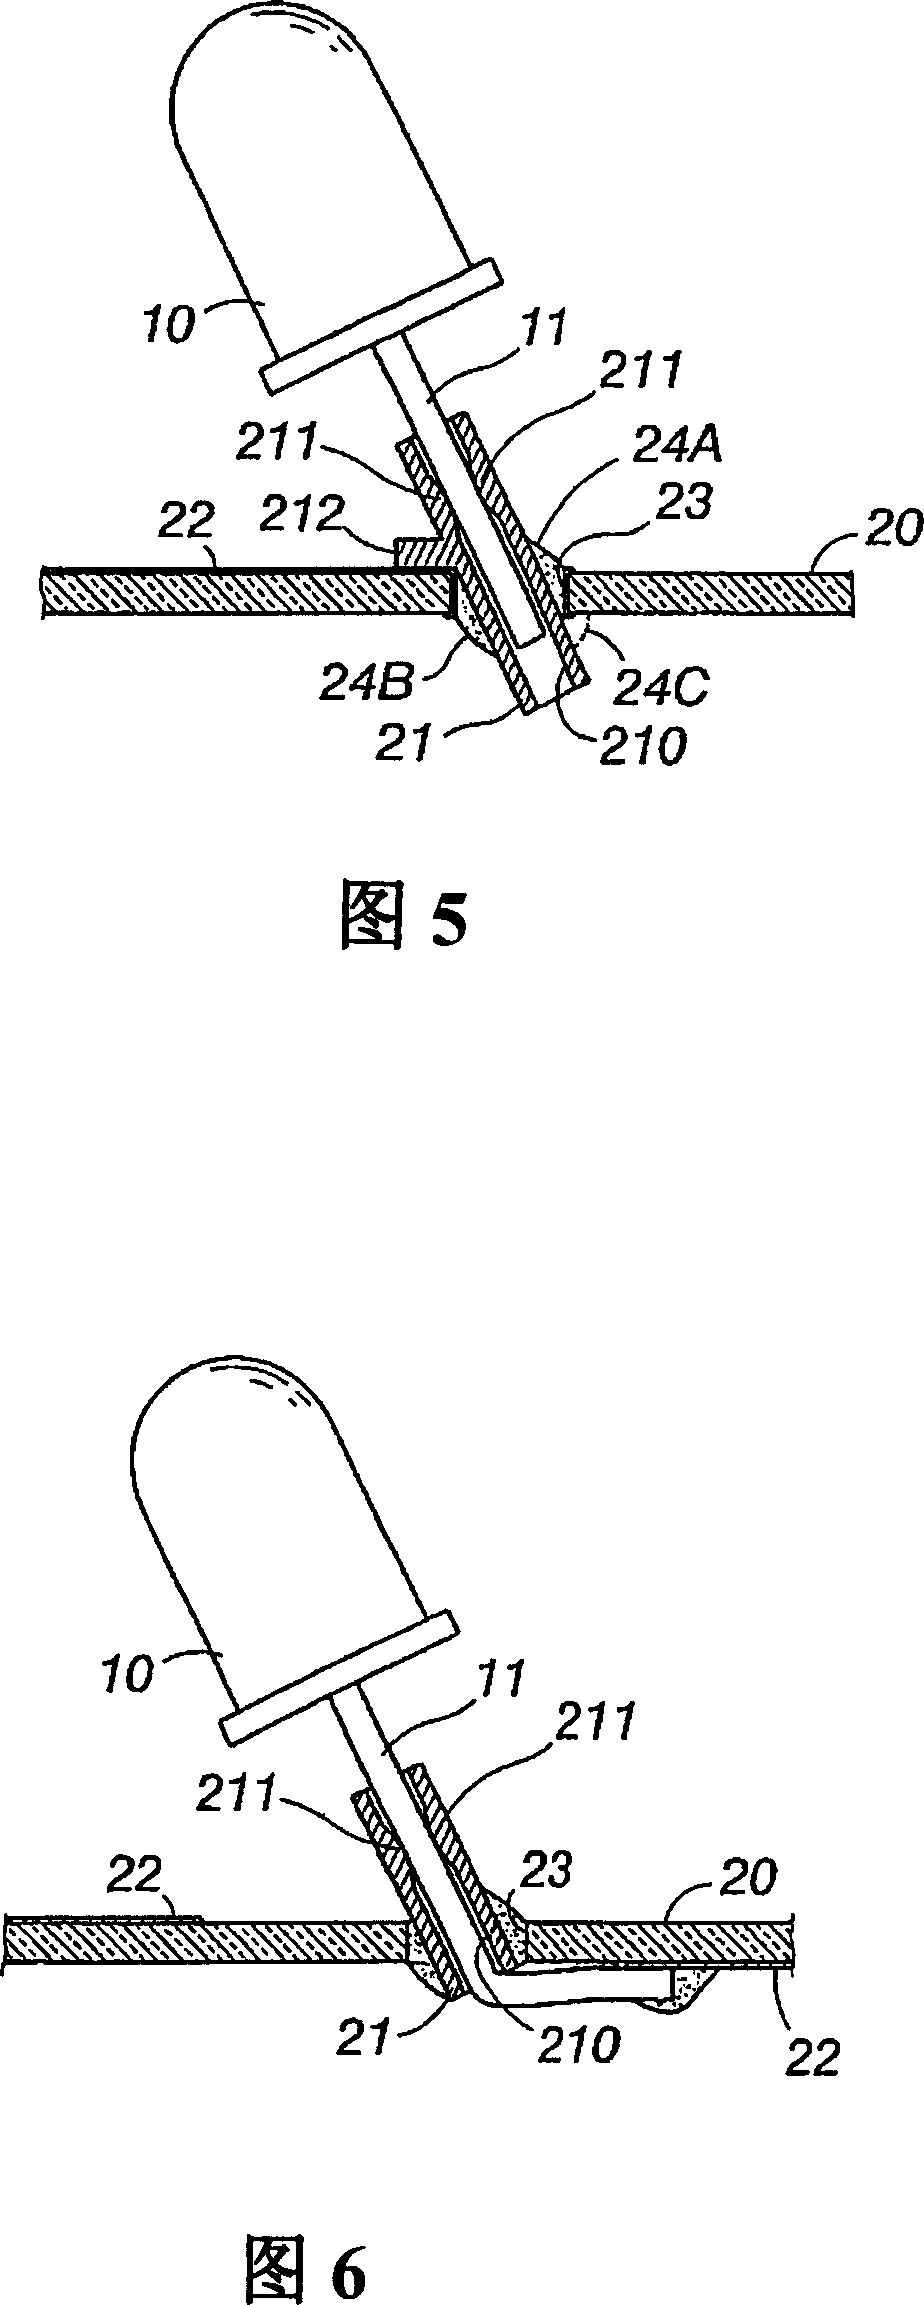 Light-emitting diode positioning device